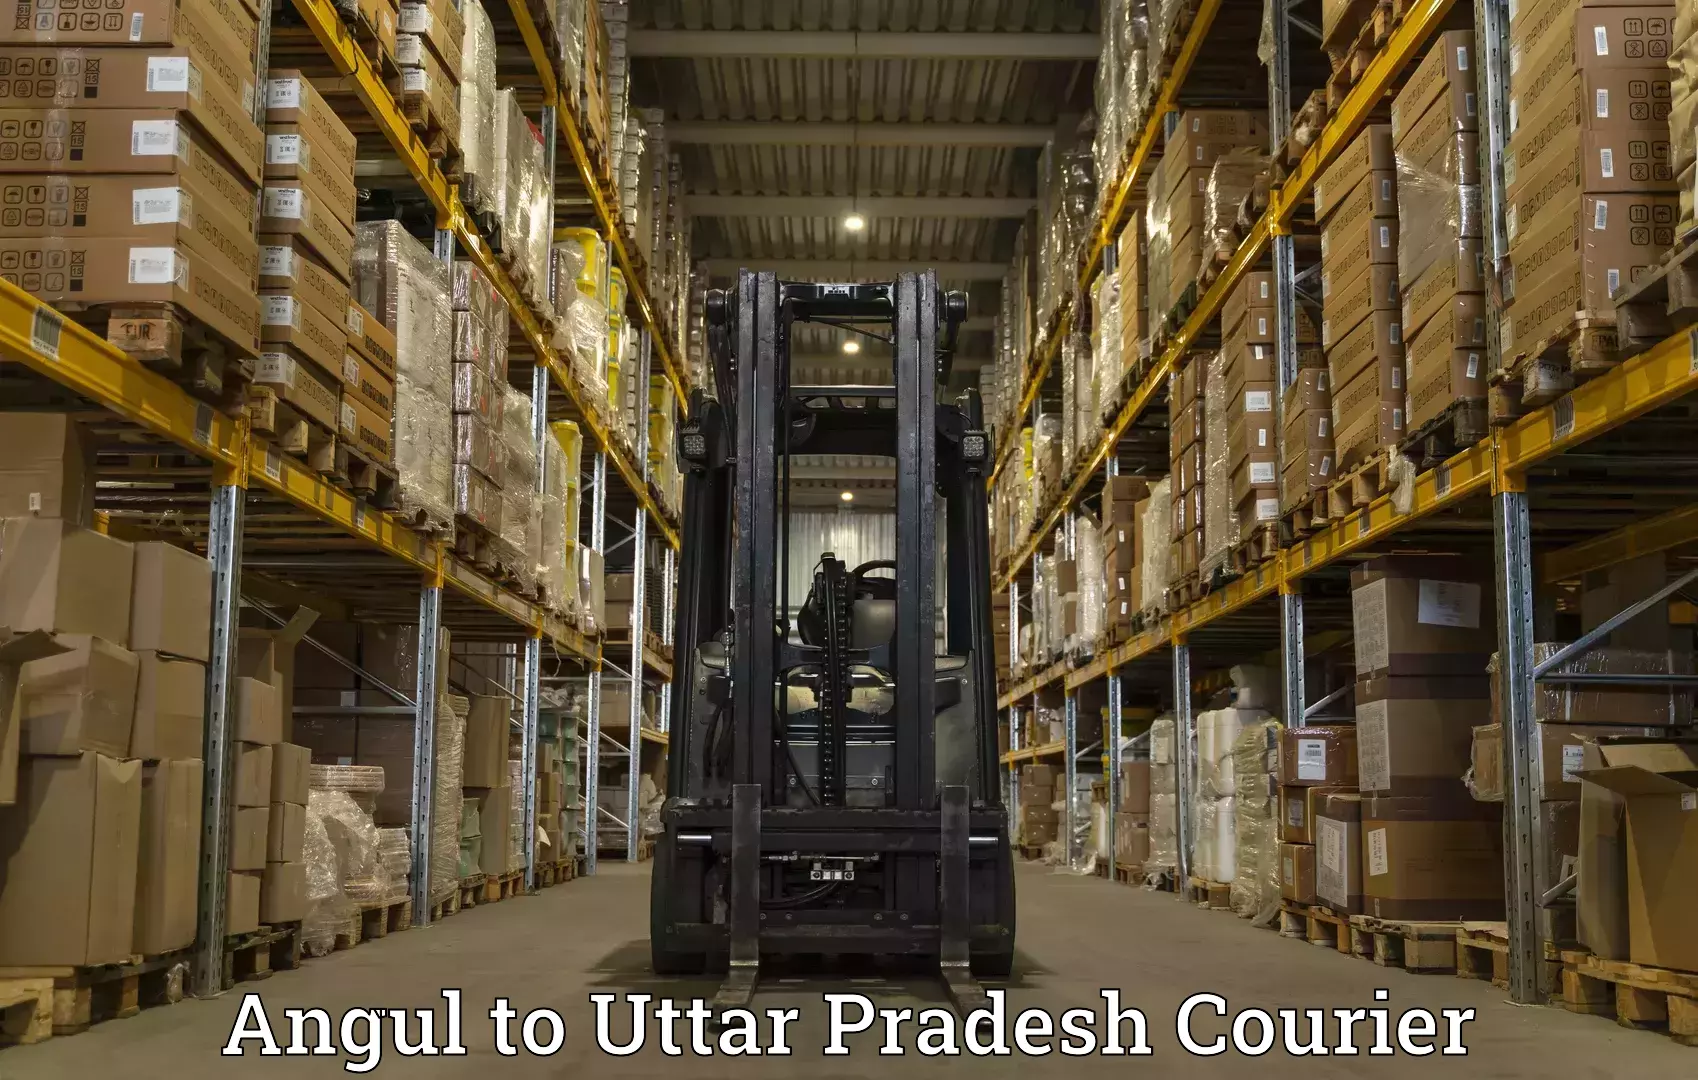 Customized shipping options Angul to Rath